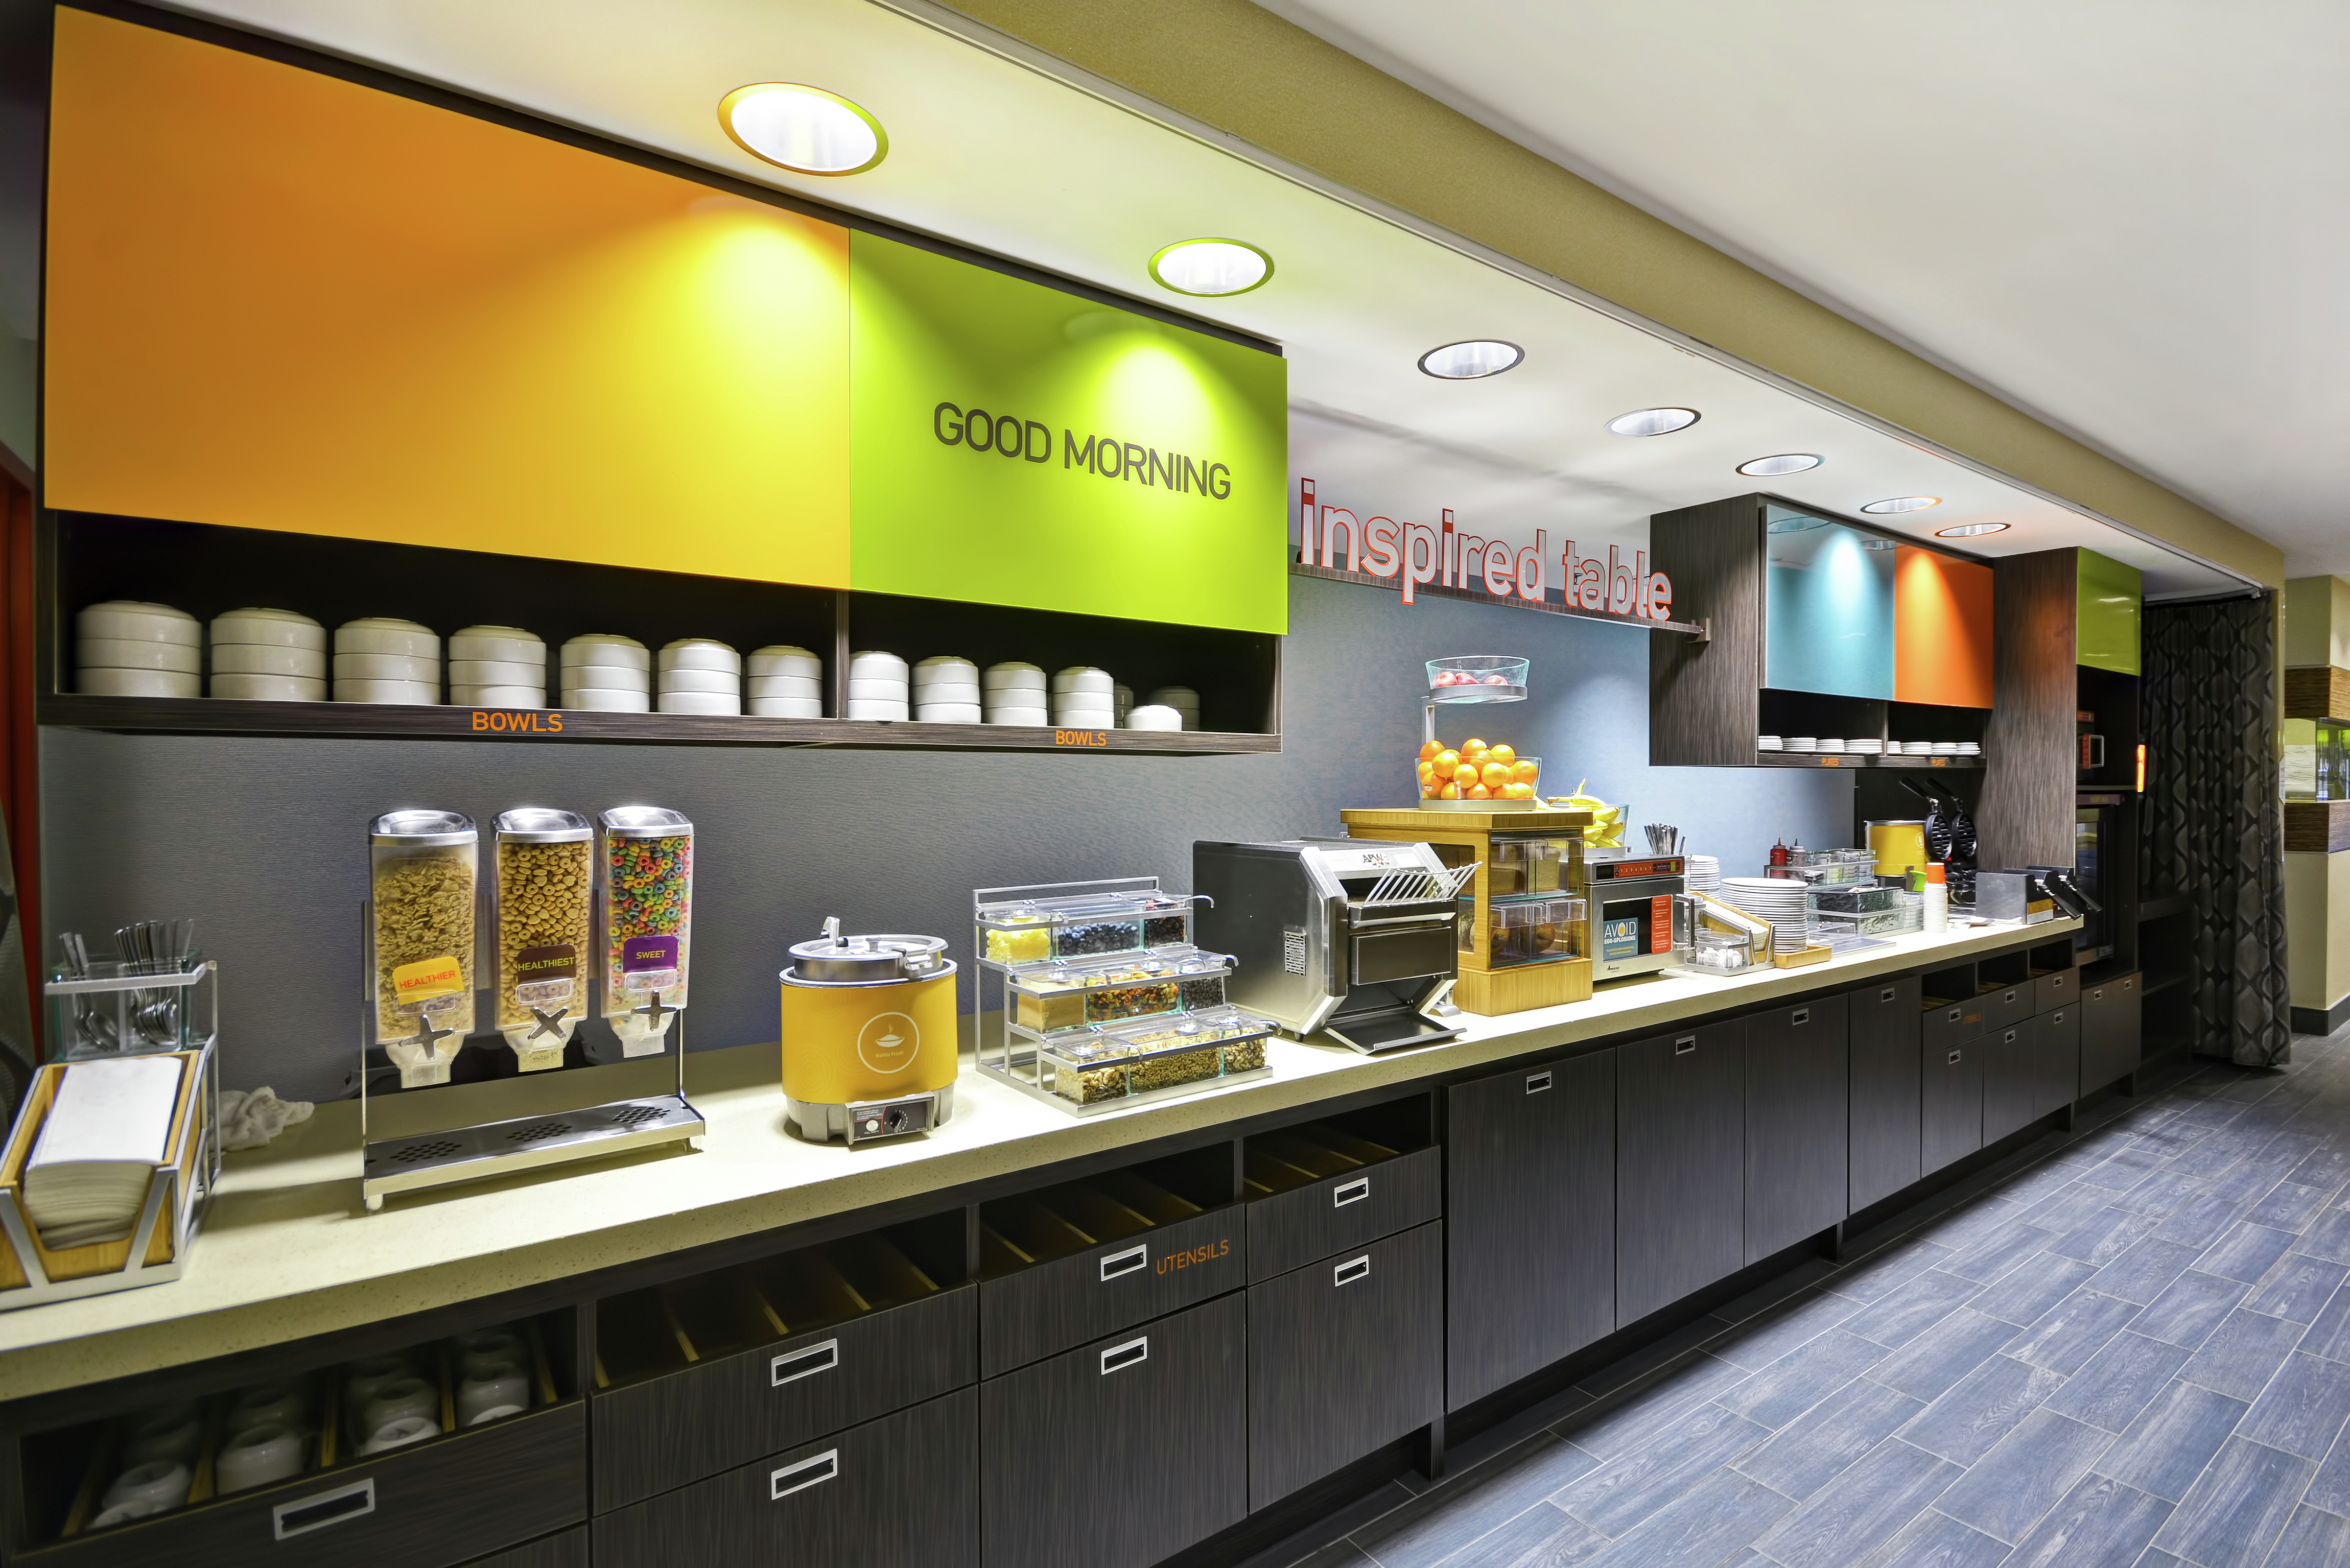 Breakfast Bar Area with Selection of Cereals and Fresh Fruits